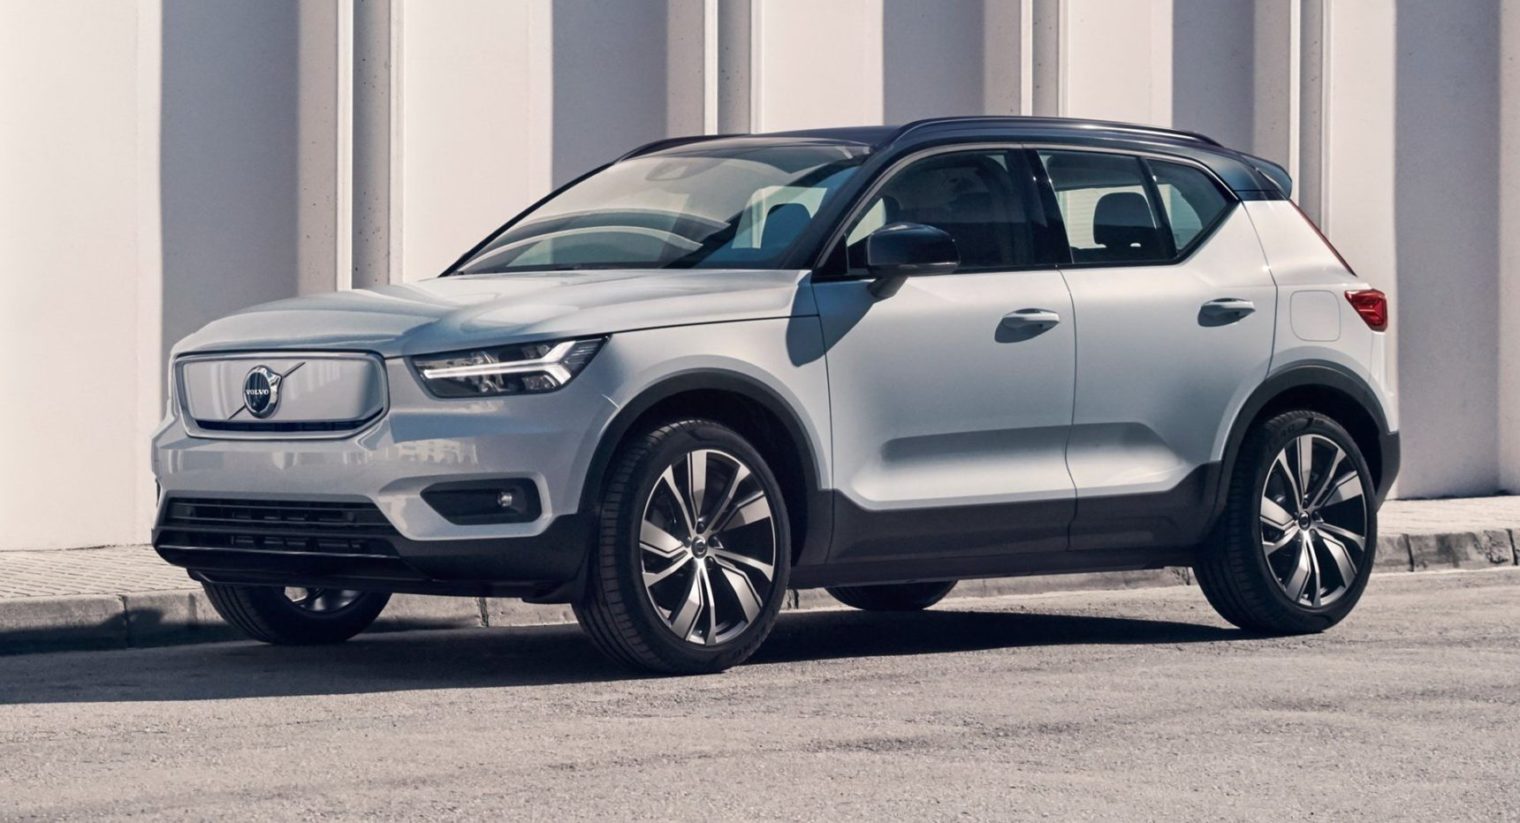 5 Things To Know About Volvo's First Full EV 'XC40 Recharge'